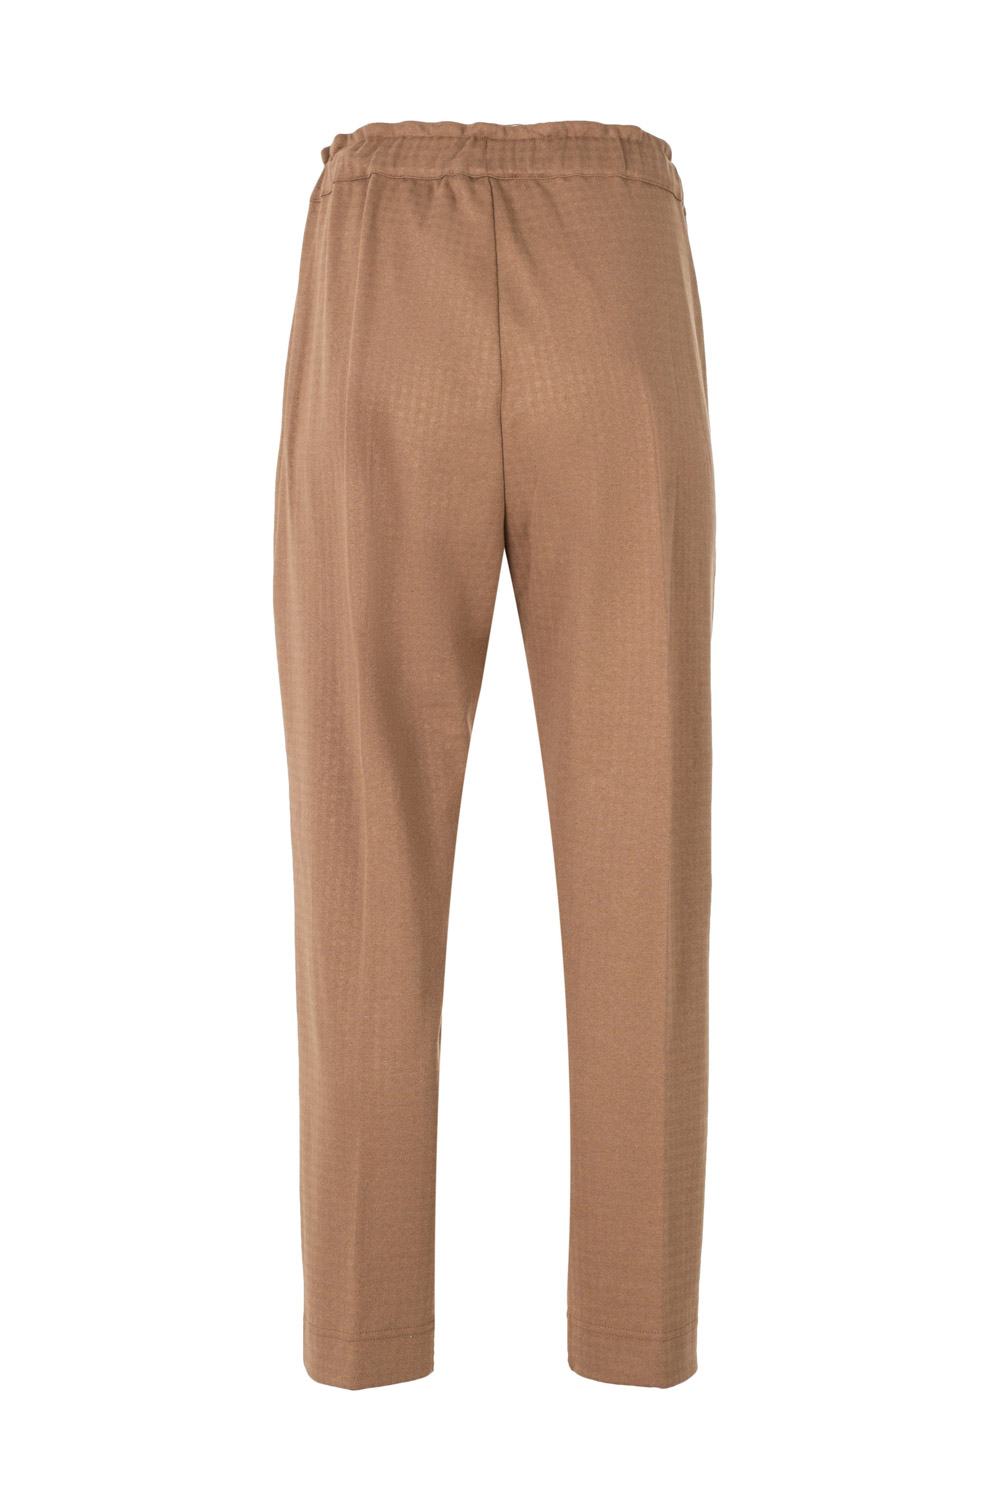 Mini Check Soft Jersey Trousers with Elasticated Waist